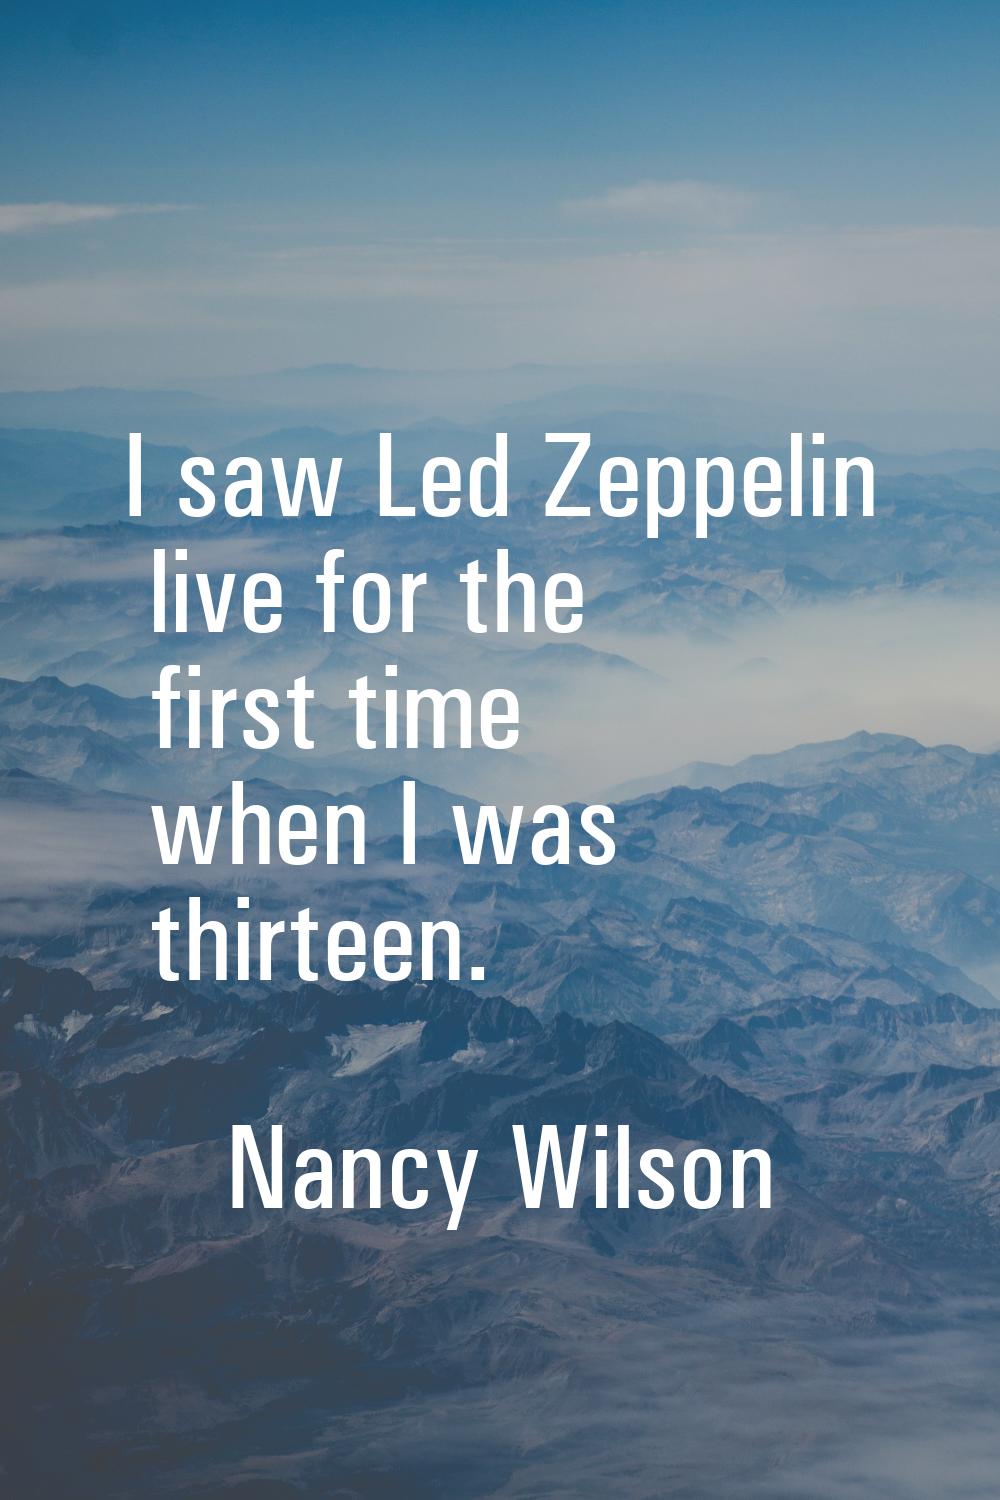 I saw Led Zeppelin live for the first time when I was thirteen.